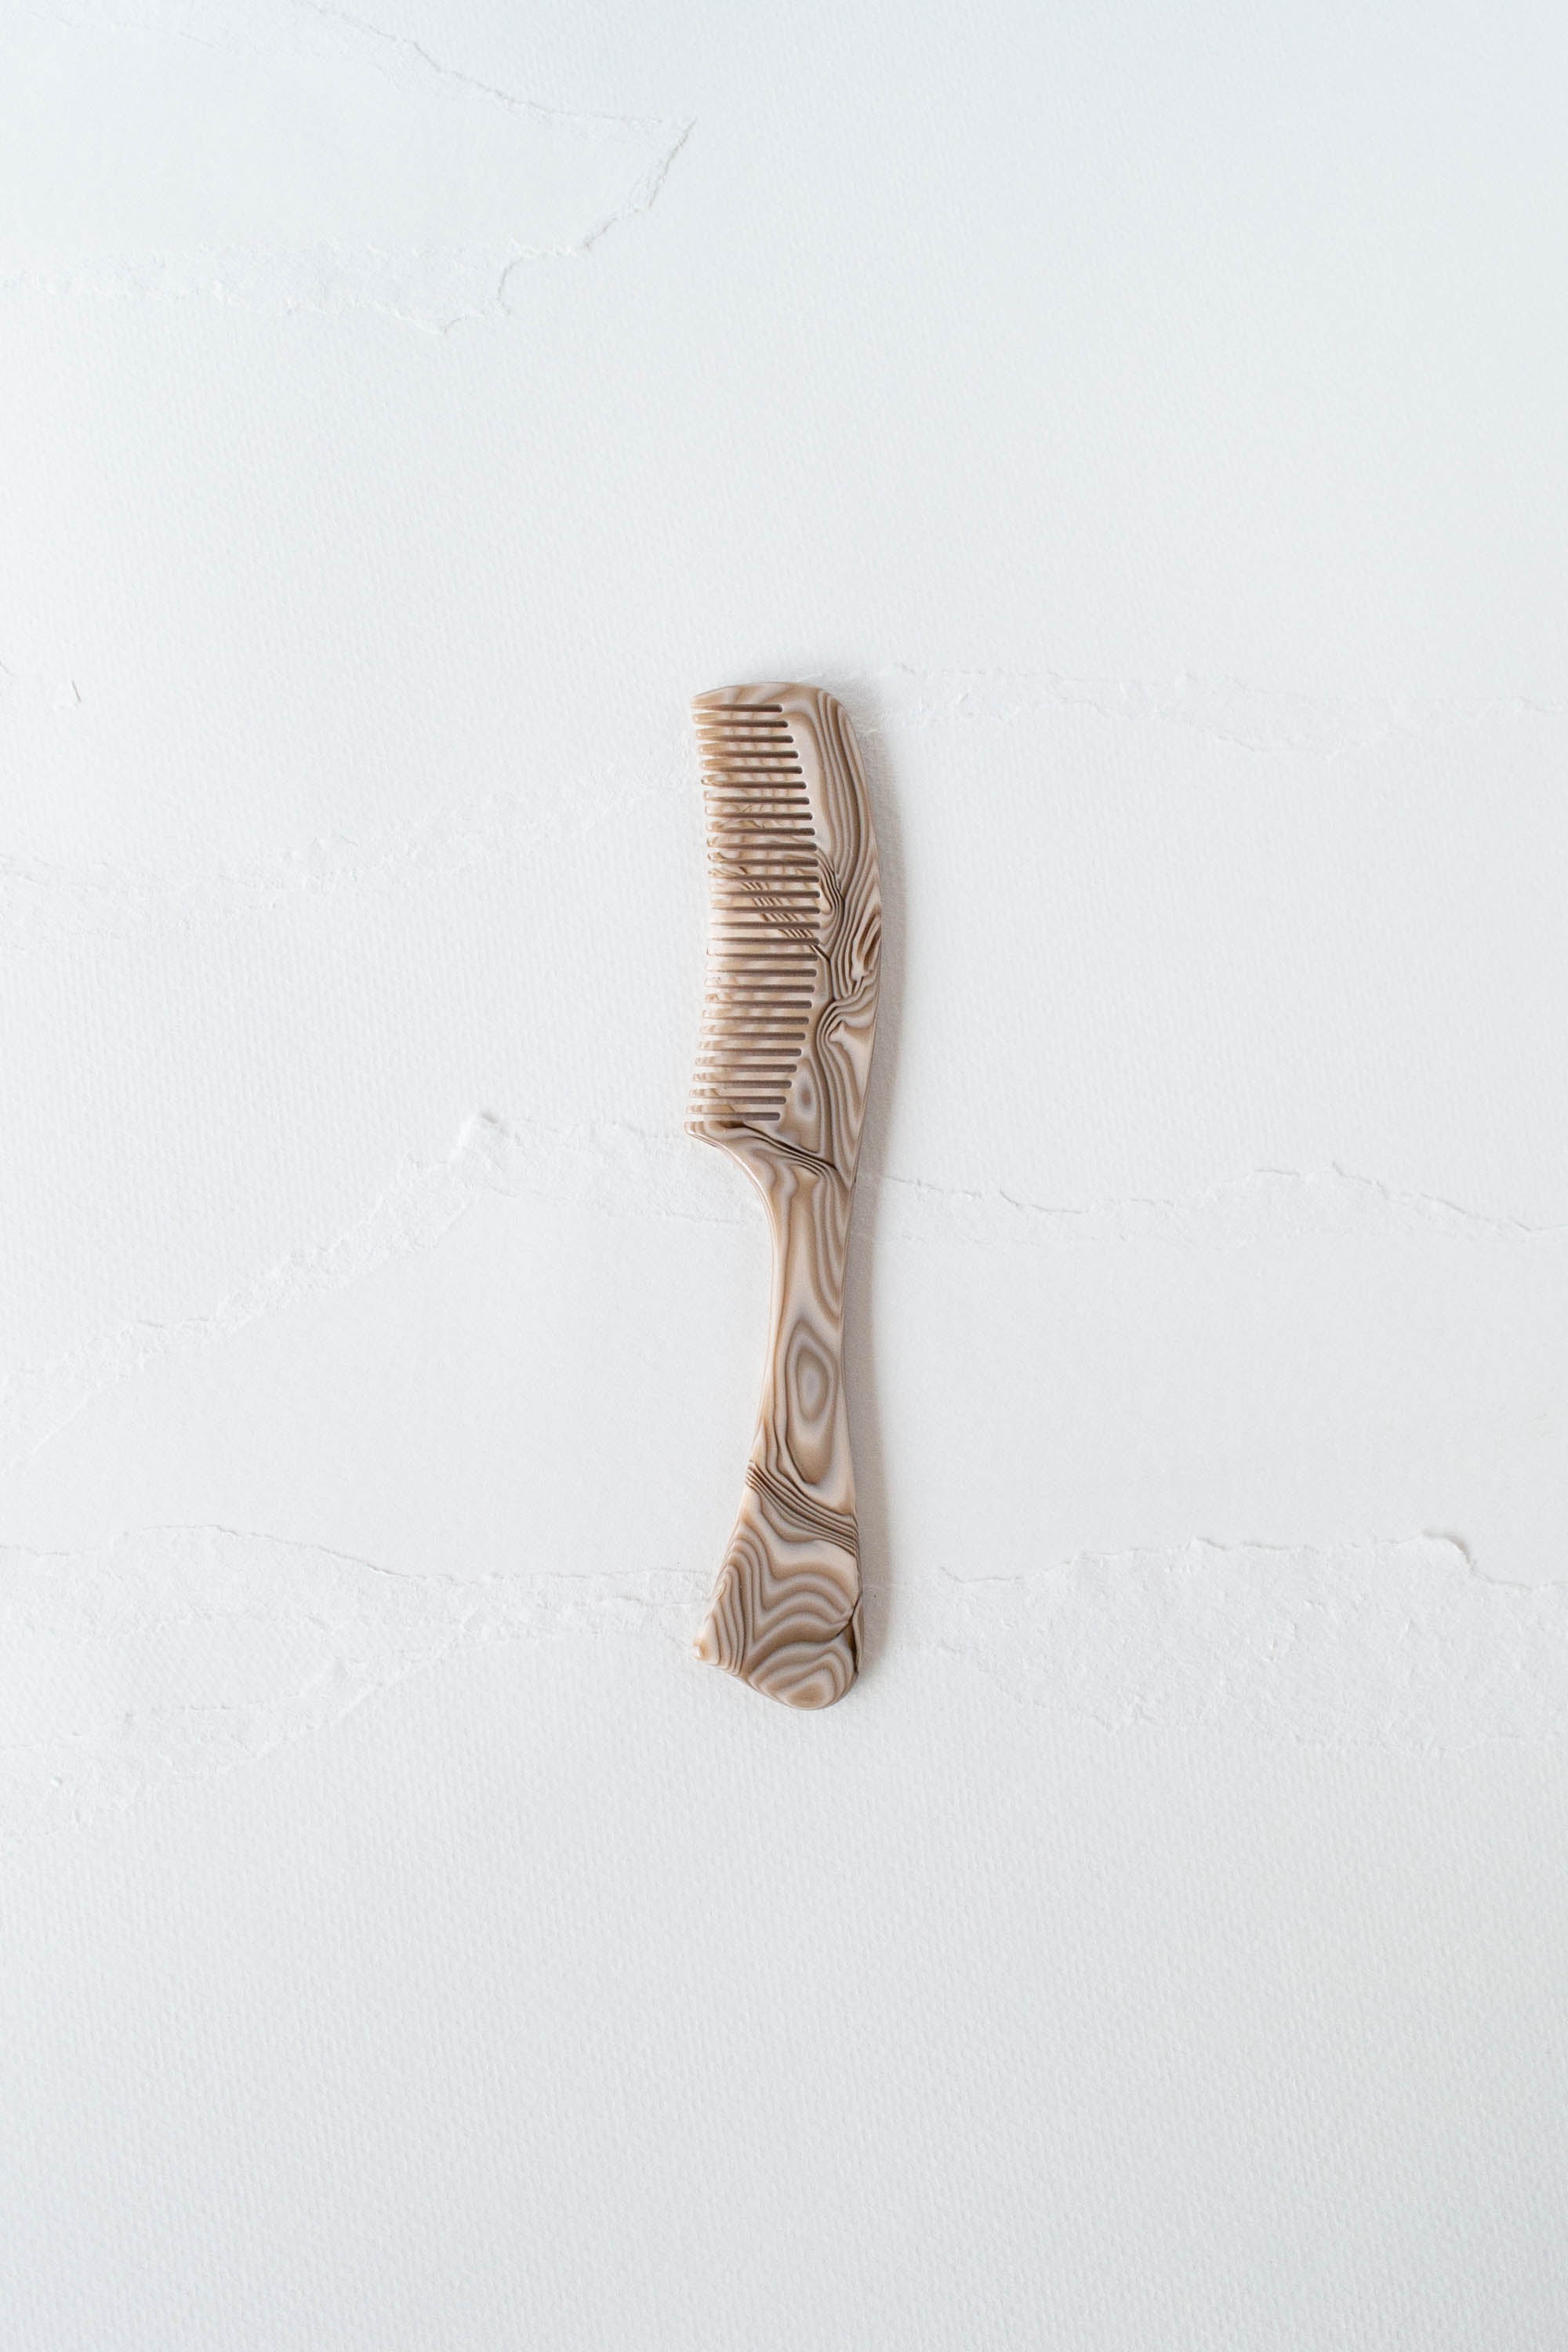 Eco Hatchet Cellulose Hair Combs